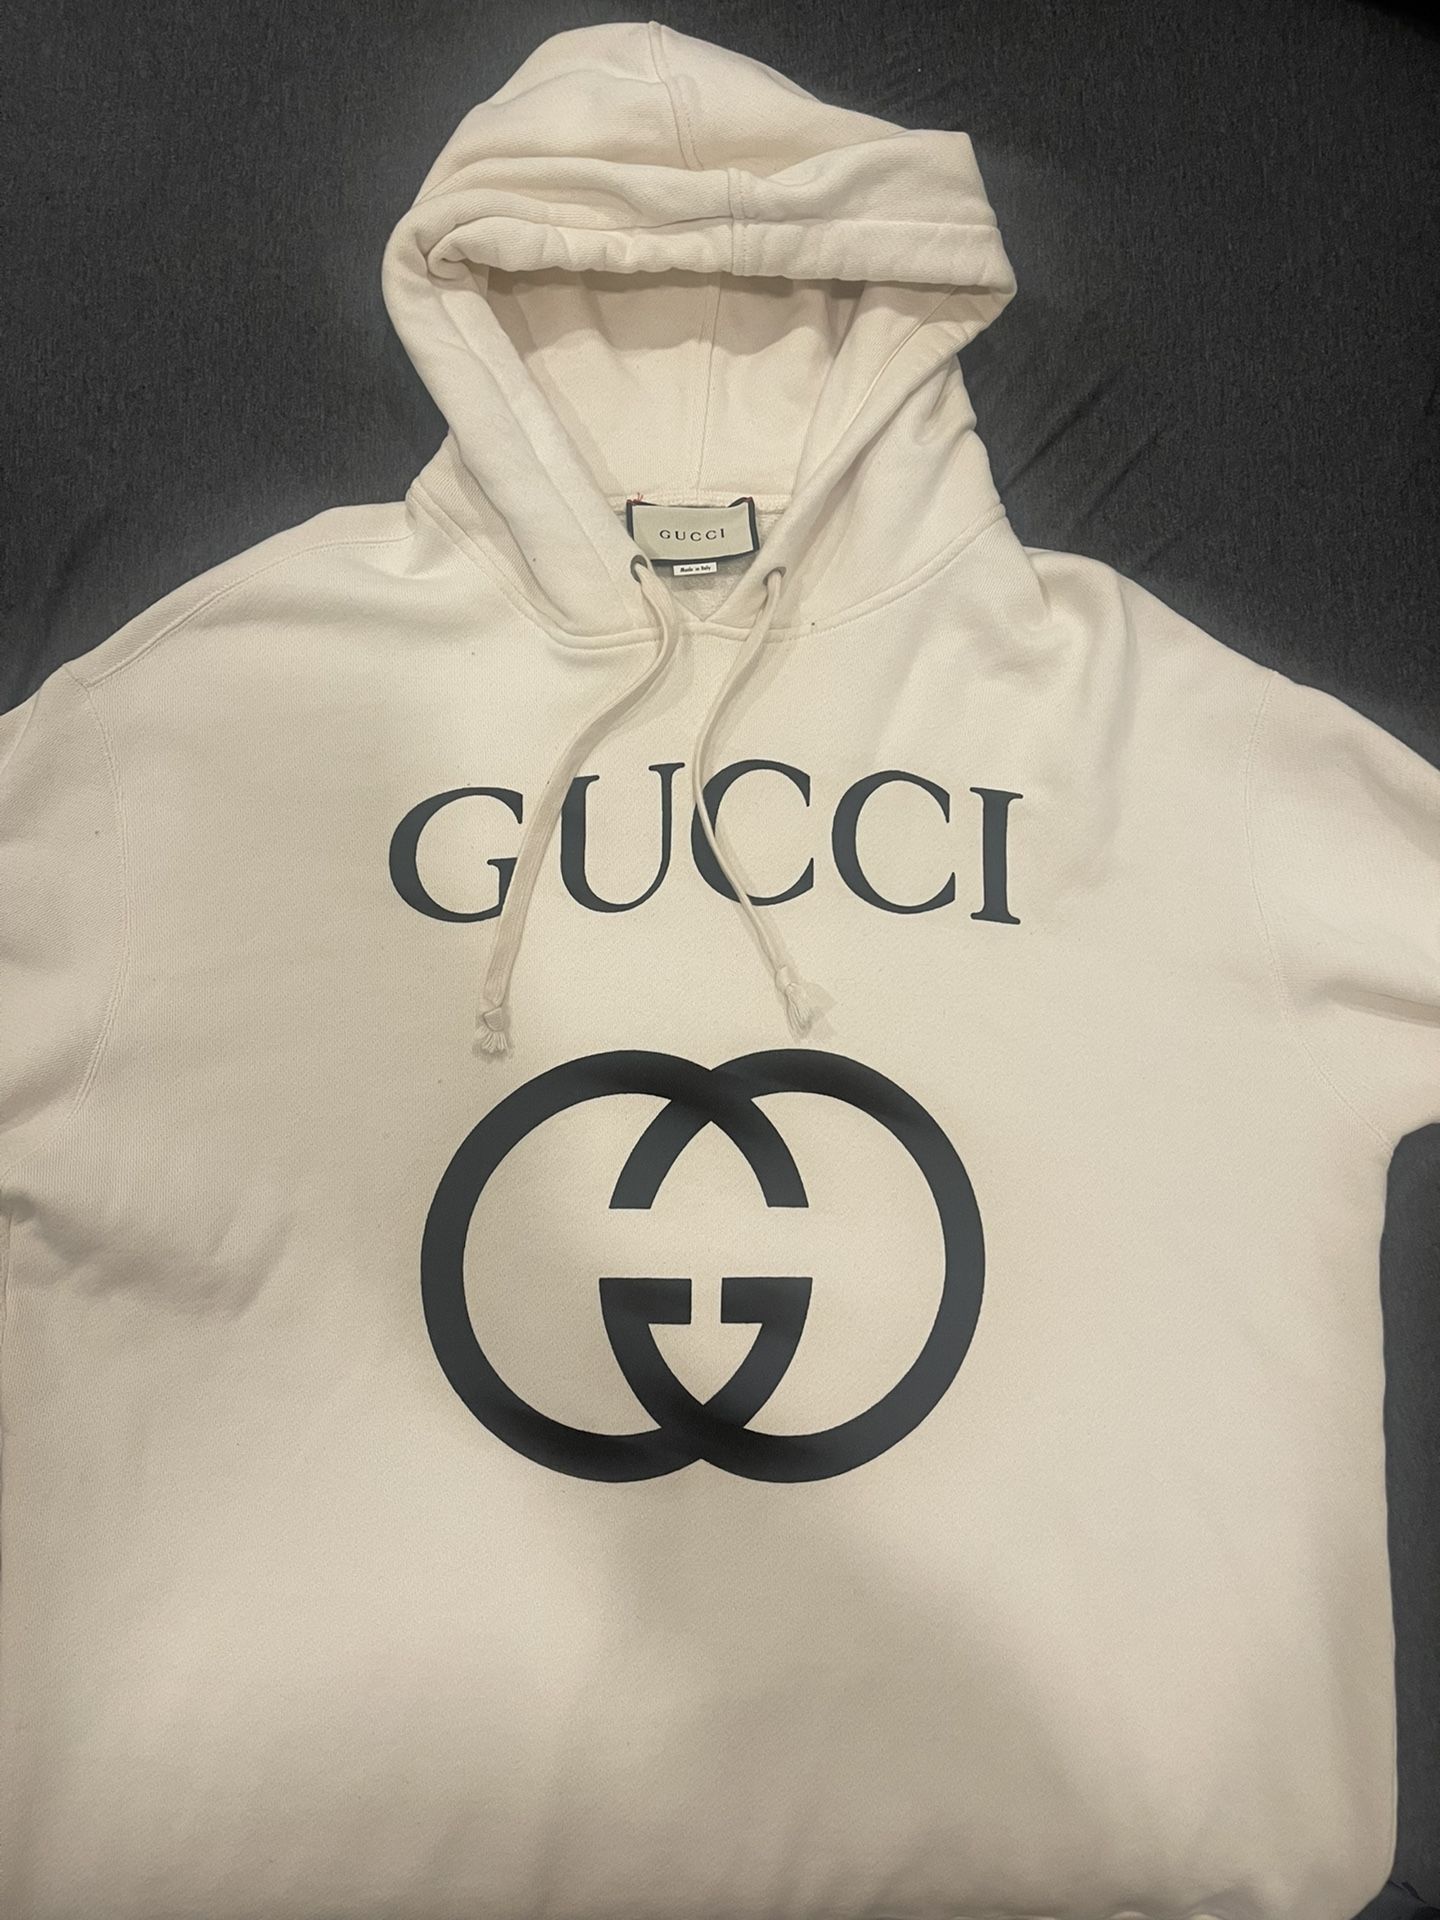 Gucci Cream With Black Logo for Sale in Los - OfferUp